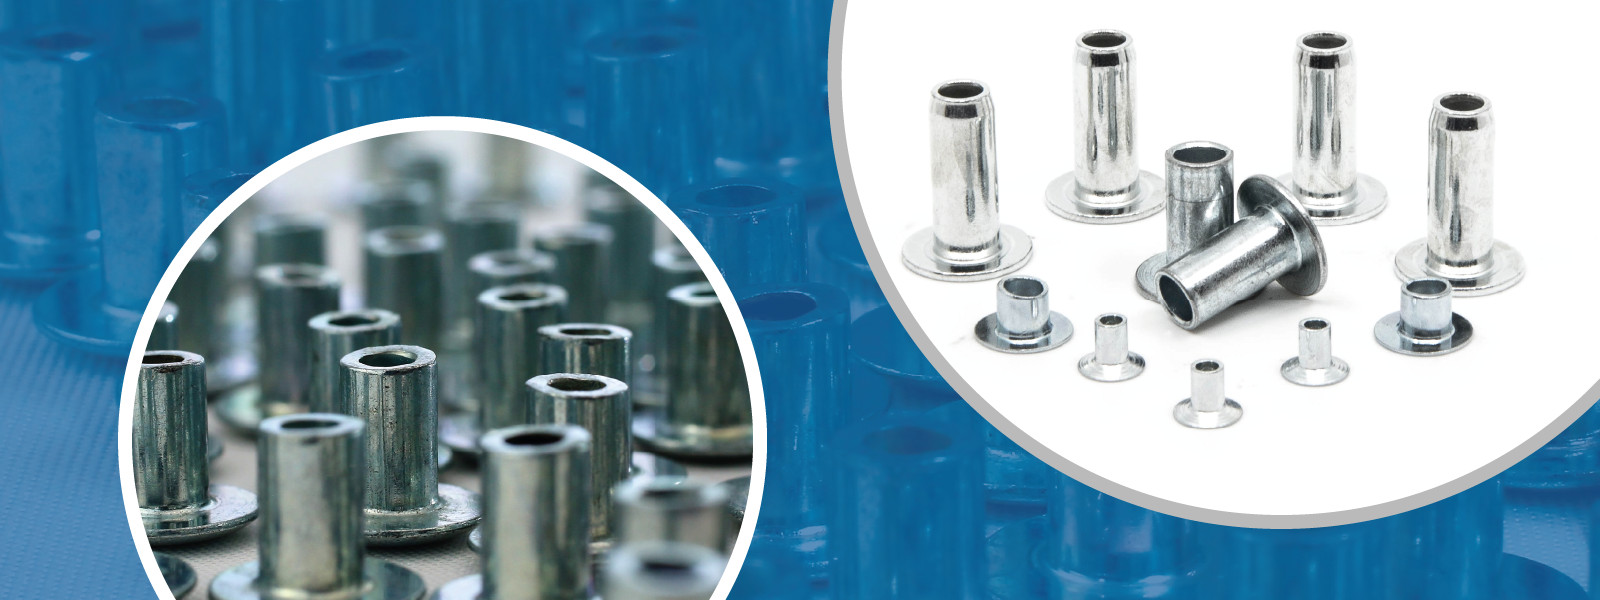 4 Key Benefits of Rivets for Industrial Applicatio...